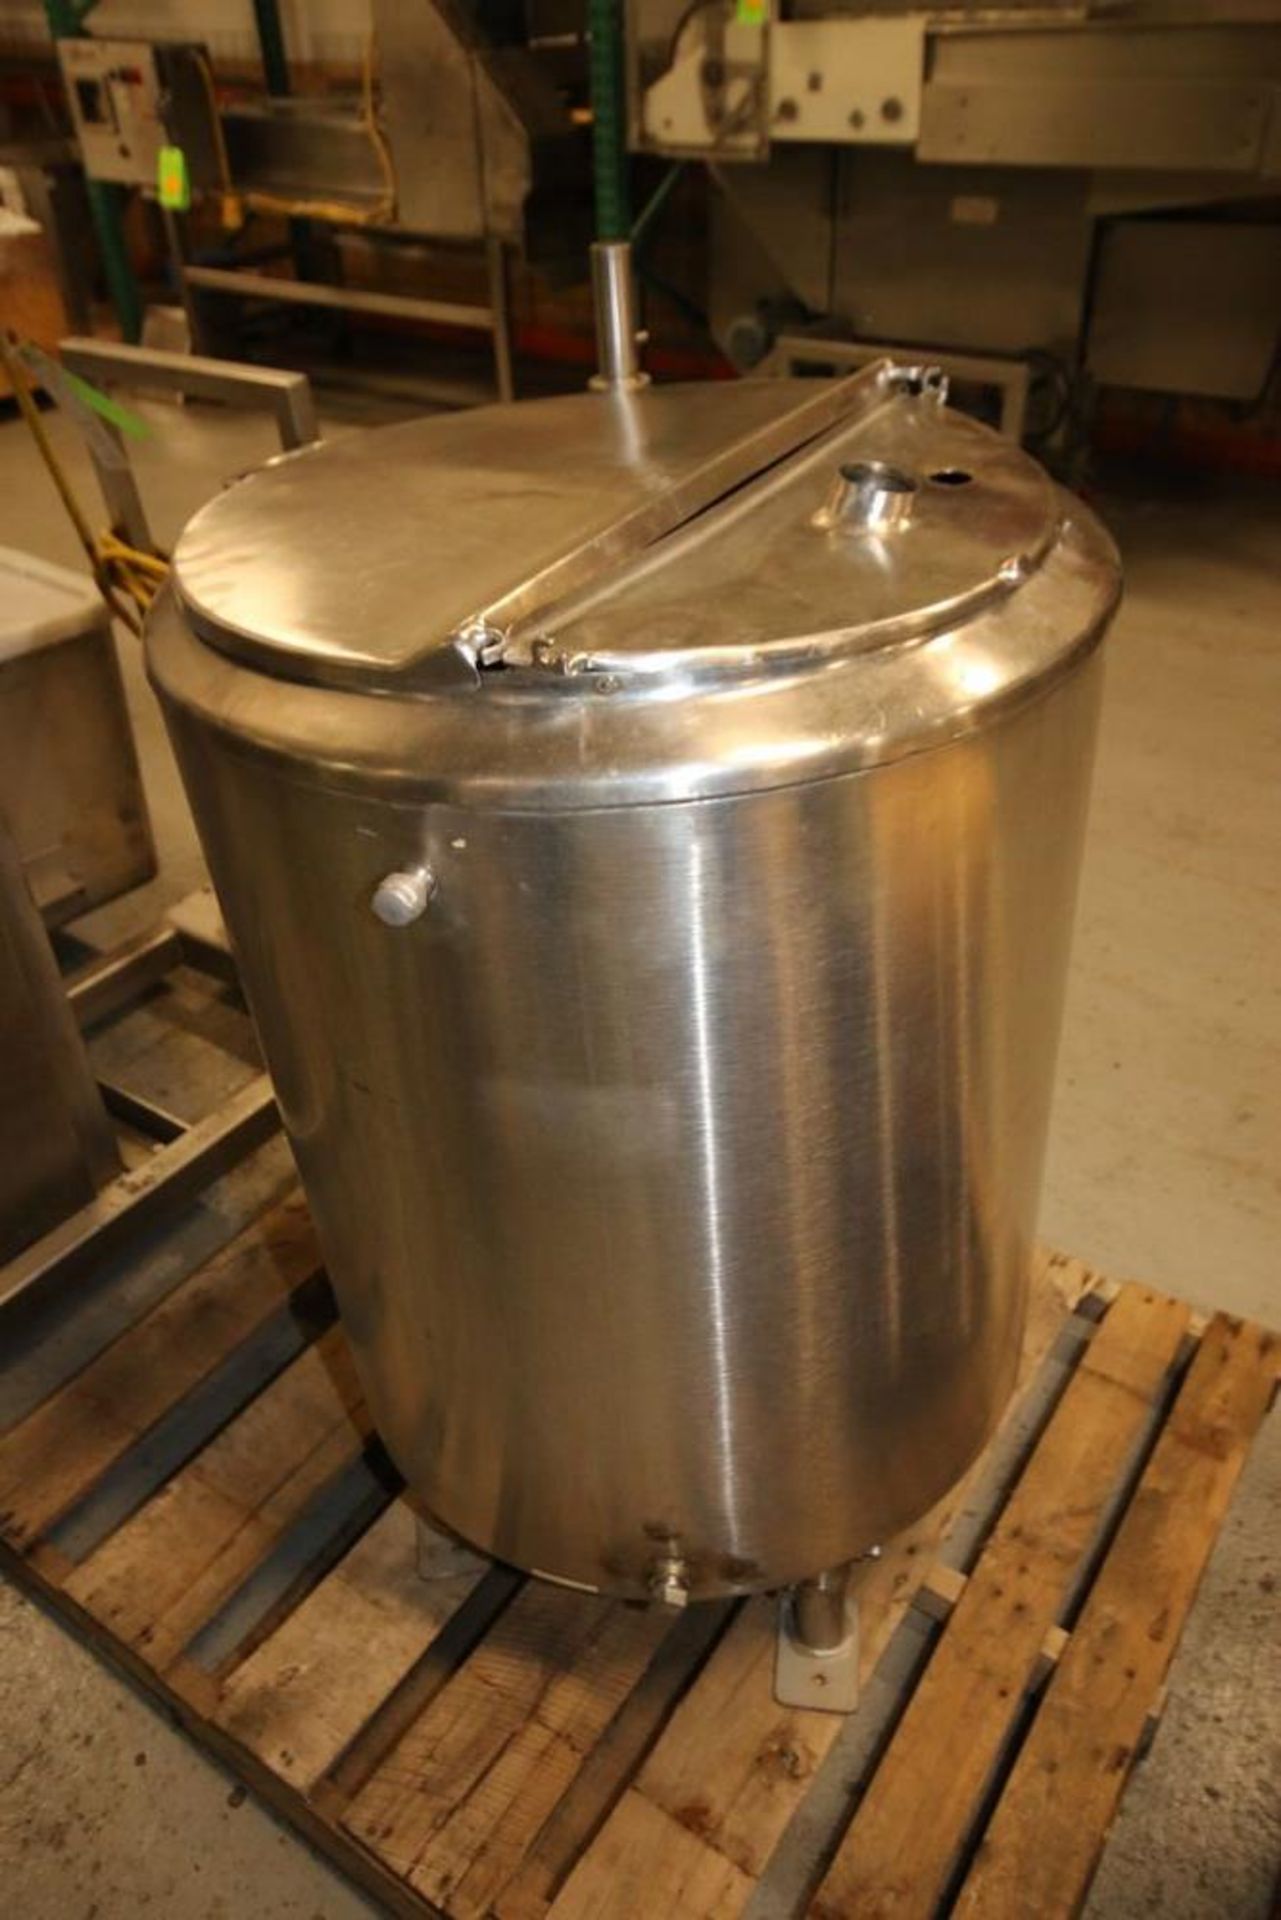 Aprox. 50 Gal. S/S Jacketed Vertical Tank, with Slope Bottom, Mounted on S/S Legs, Tank Dims.: - Image 3 of 4